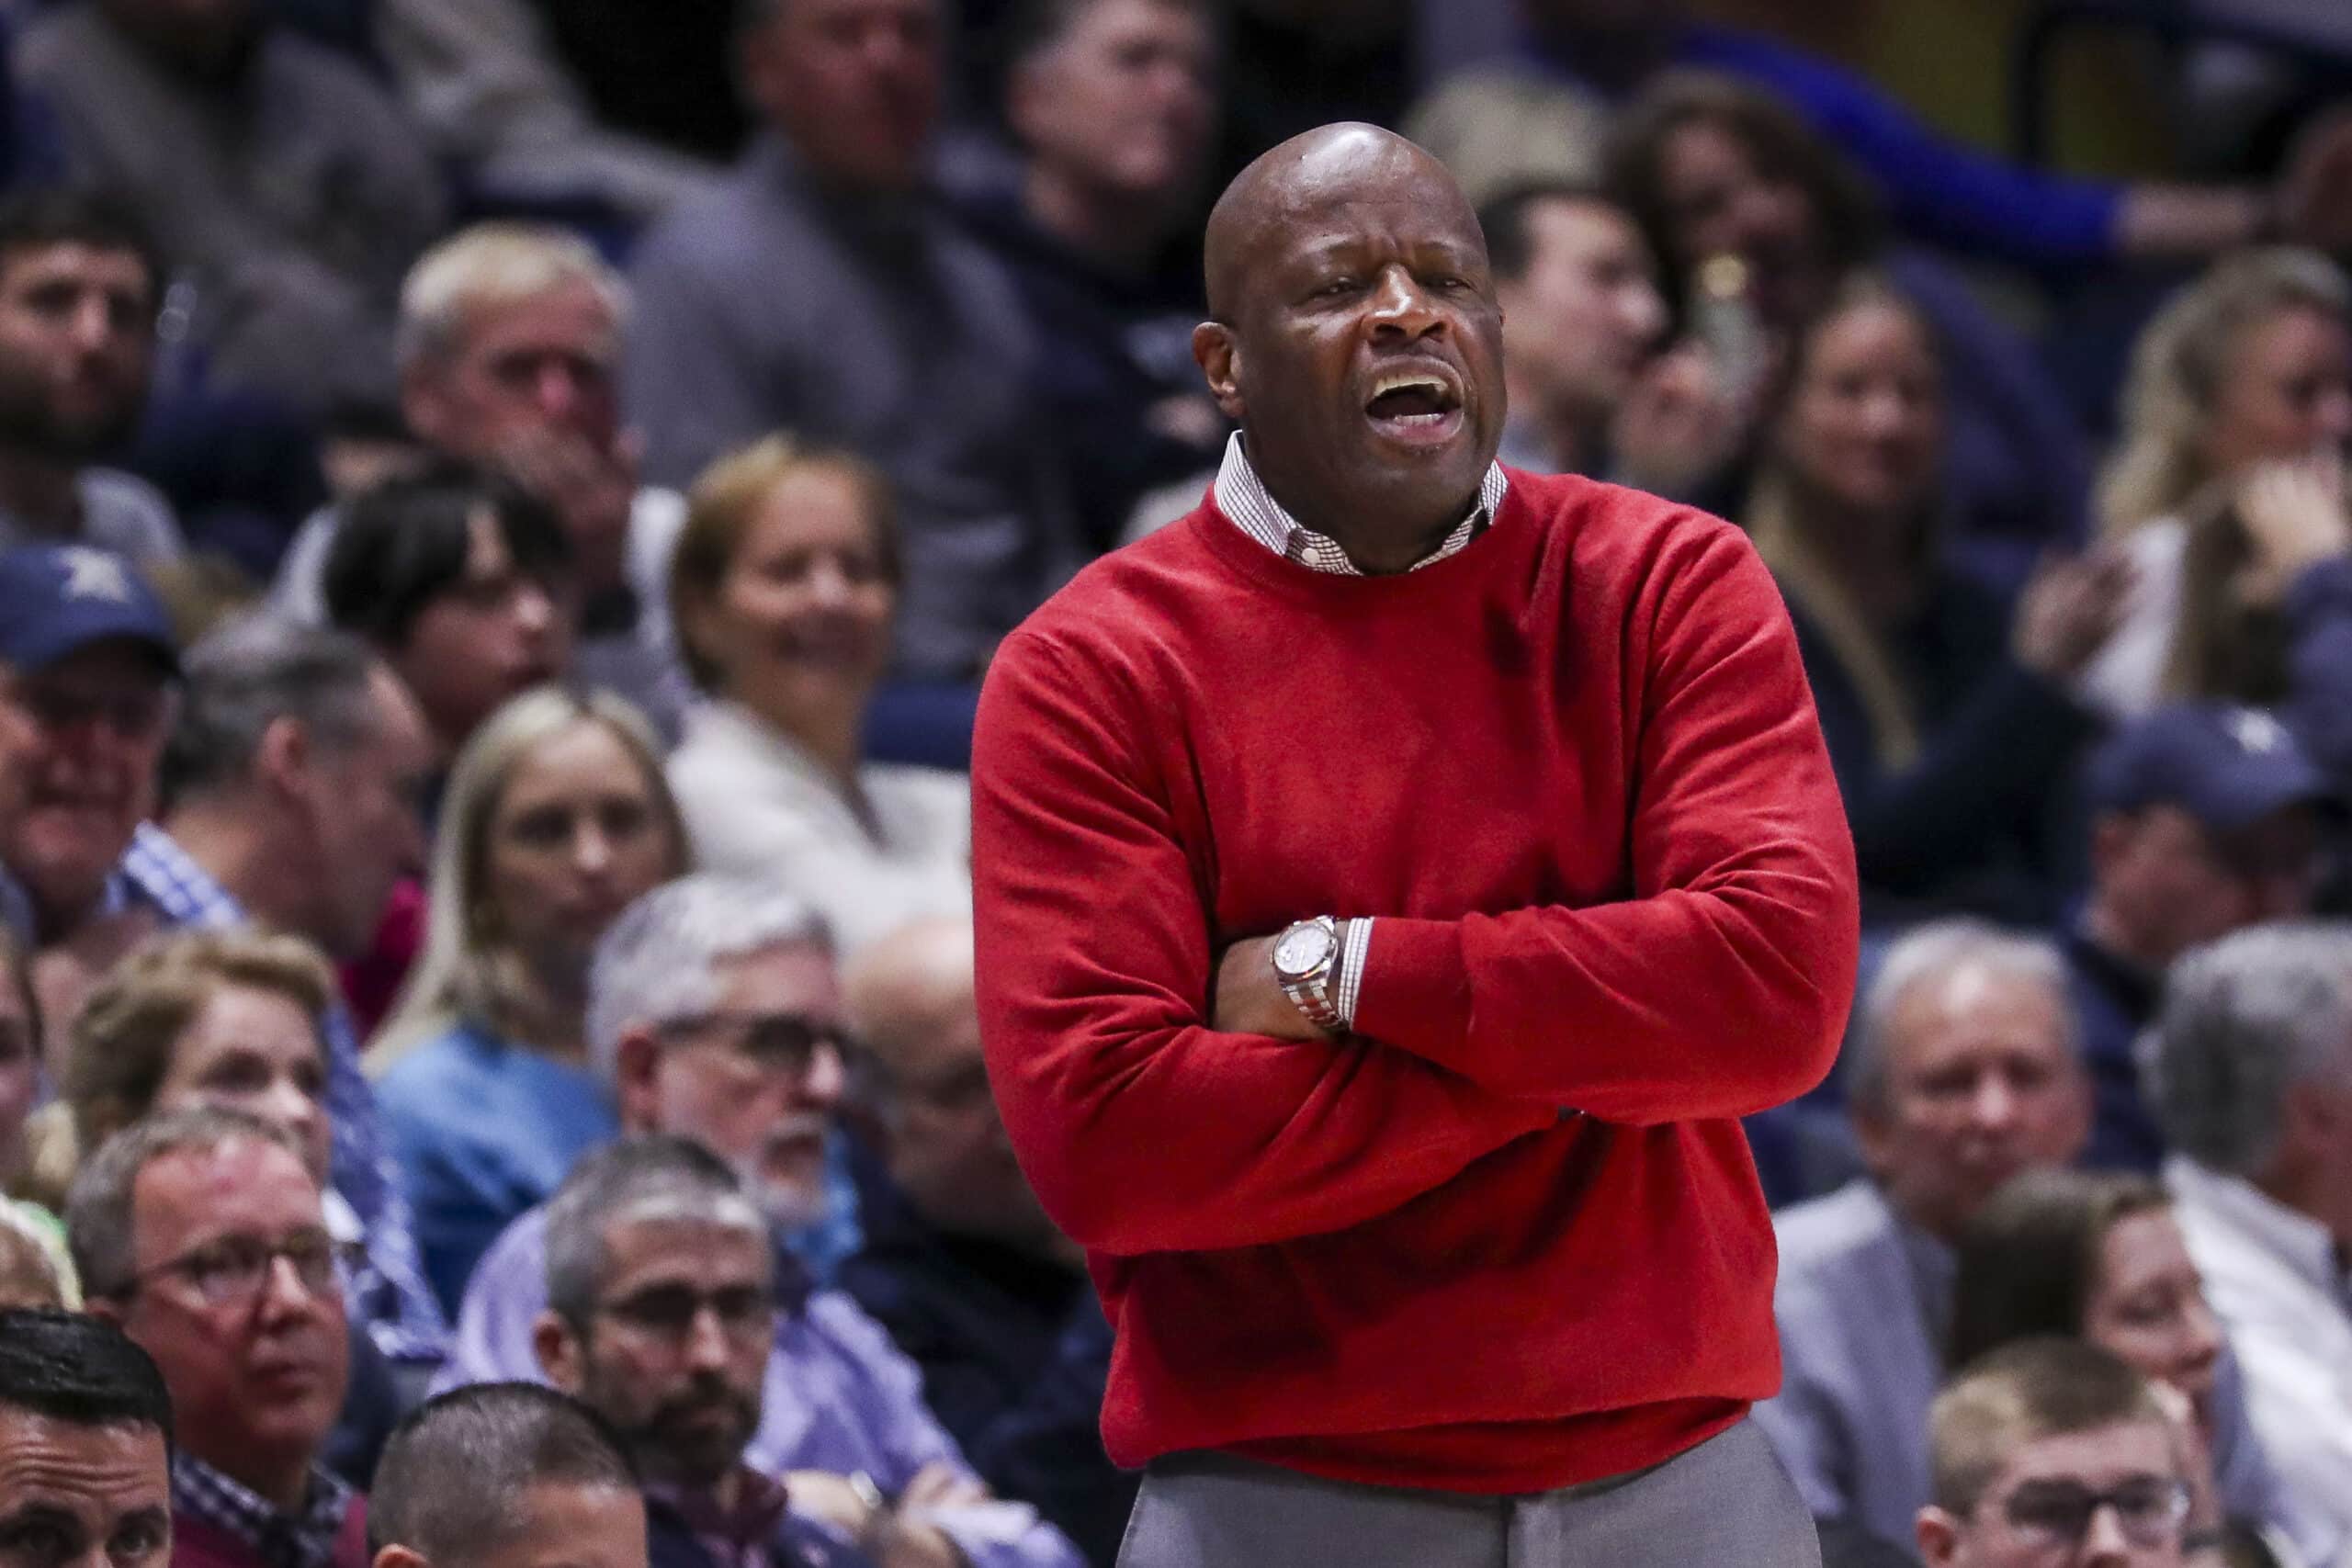 Anderson coached St. John's from 2019-2021.